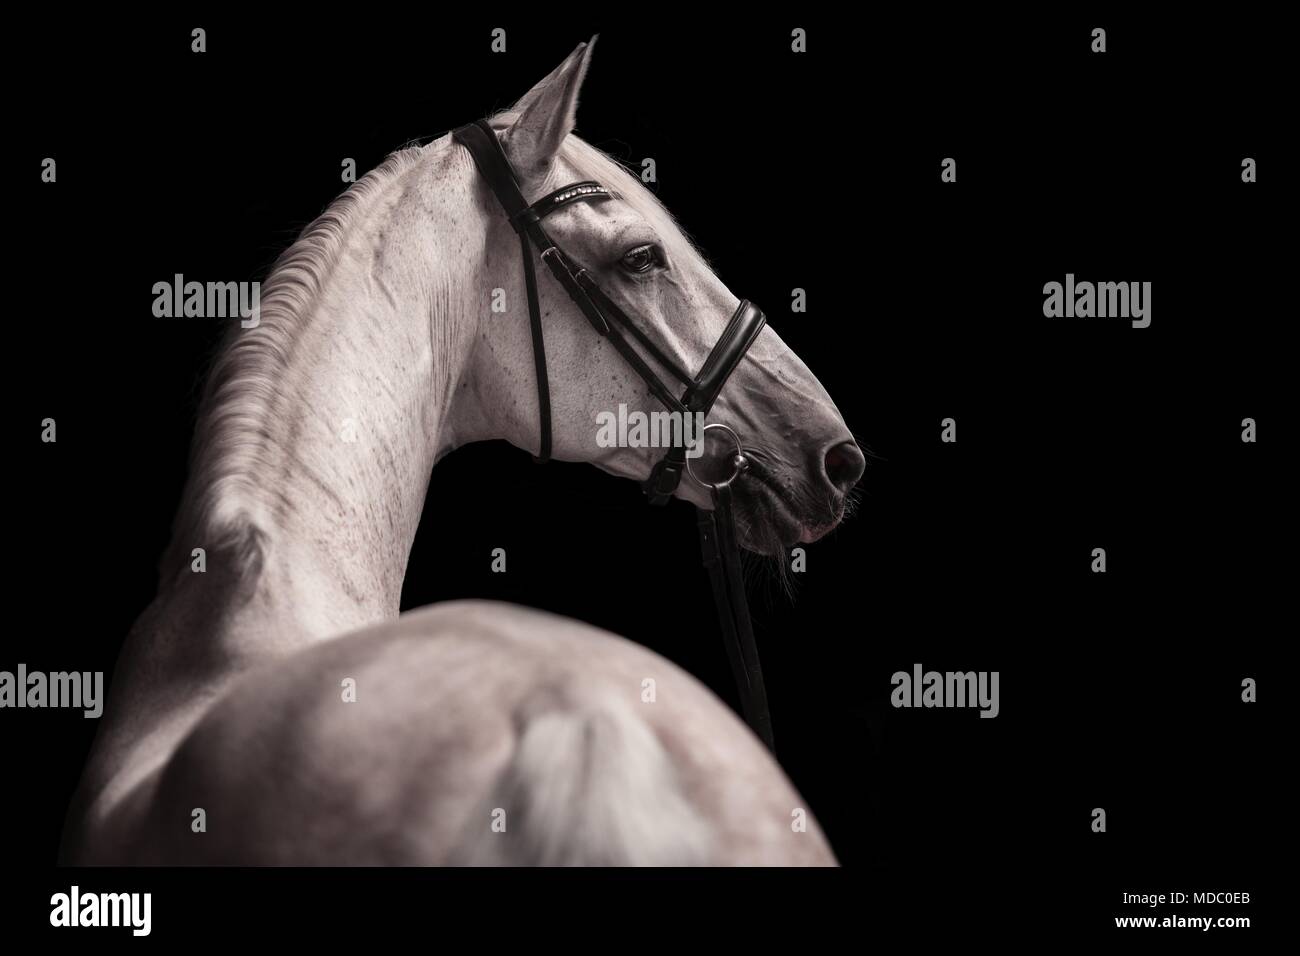 Grey horse with bridle looks to the side, animal portrait on black background, studio shot Stock Photo